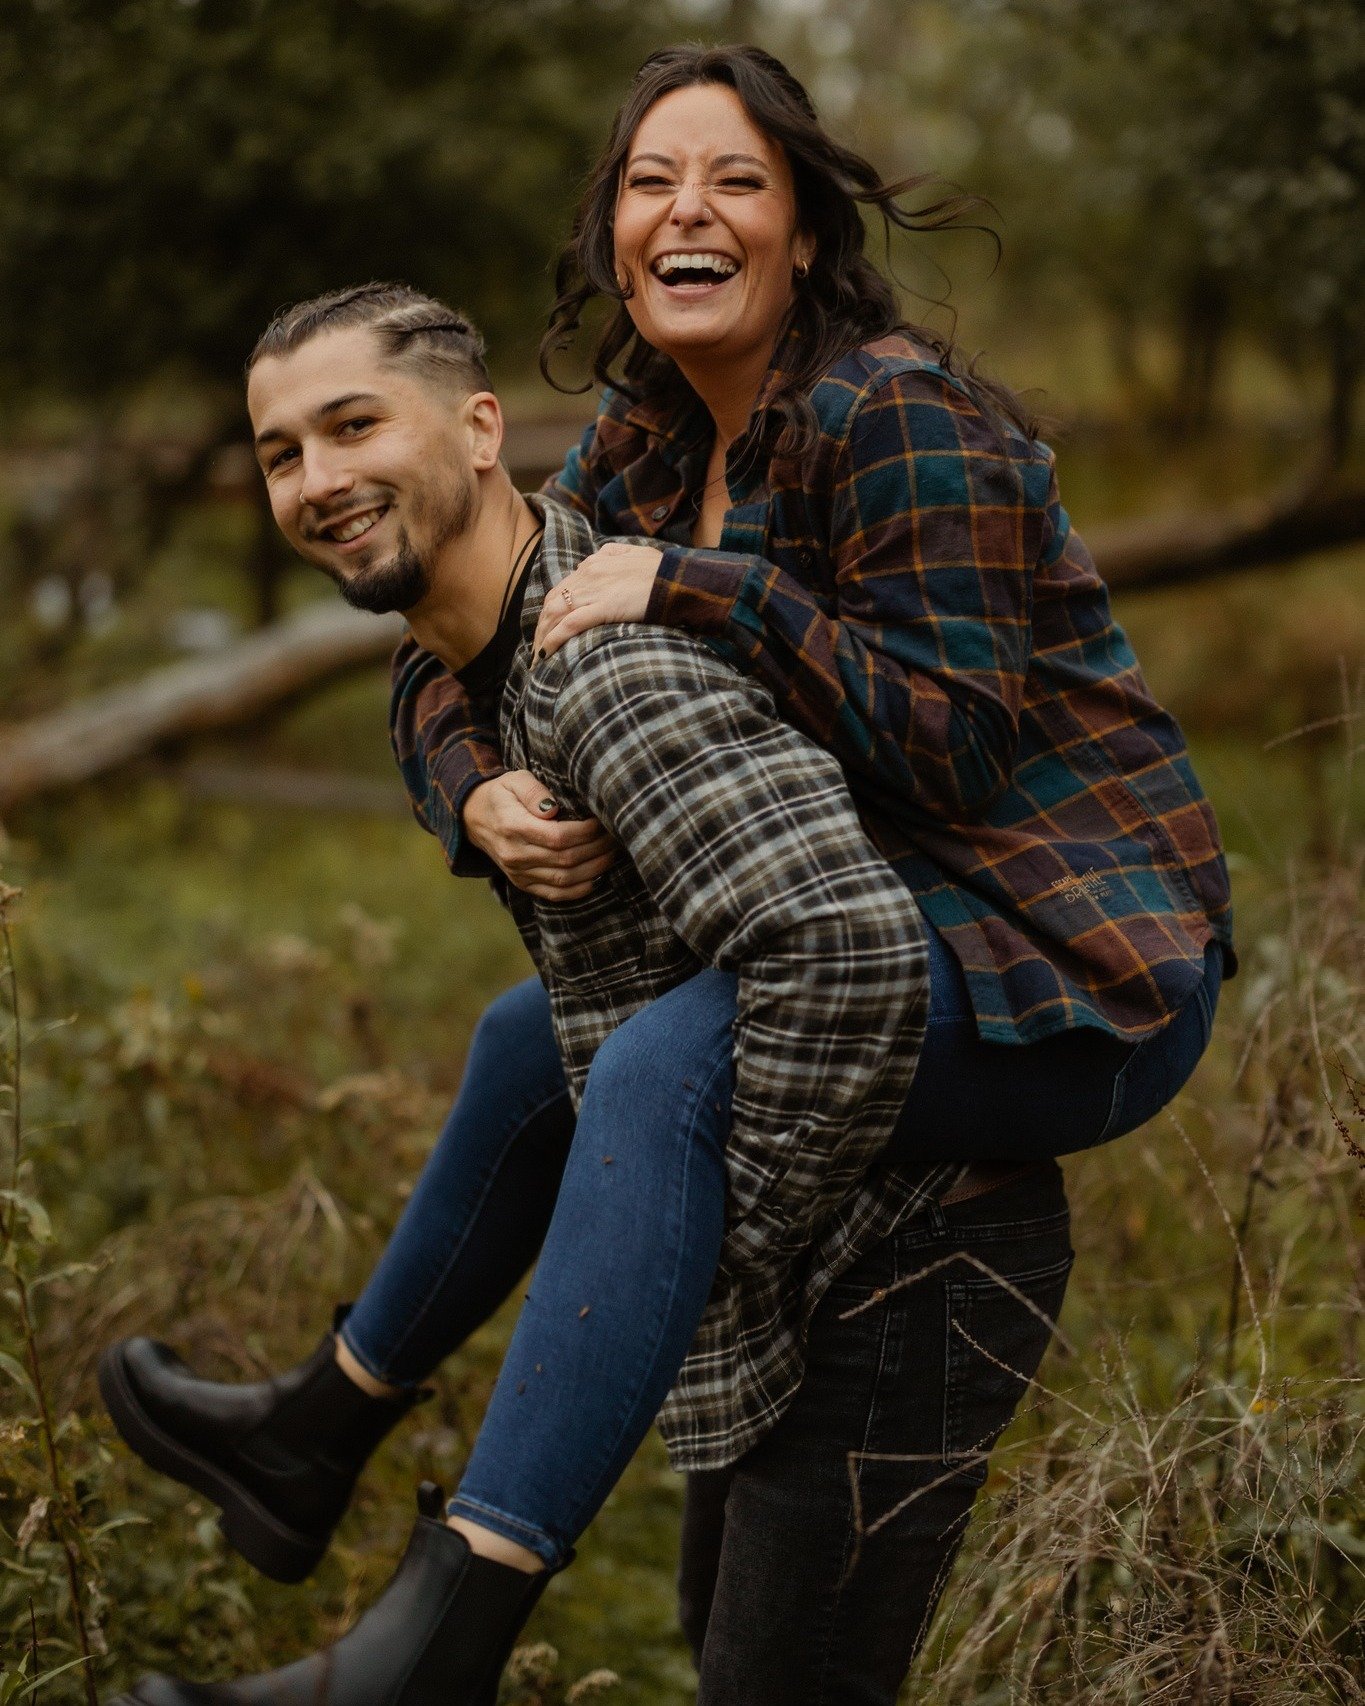 Ohhh my gosh I have so many faves from Hanna and Dakota's engagement session to share, but first I had to start with this little series of photos because they put a big smile on my face. We had so much fun and so many laughs. It means the world when 